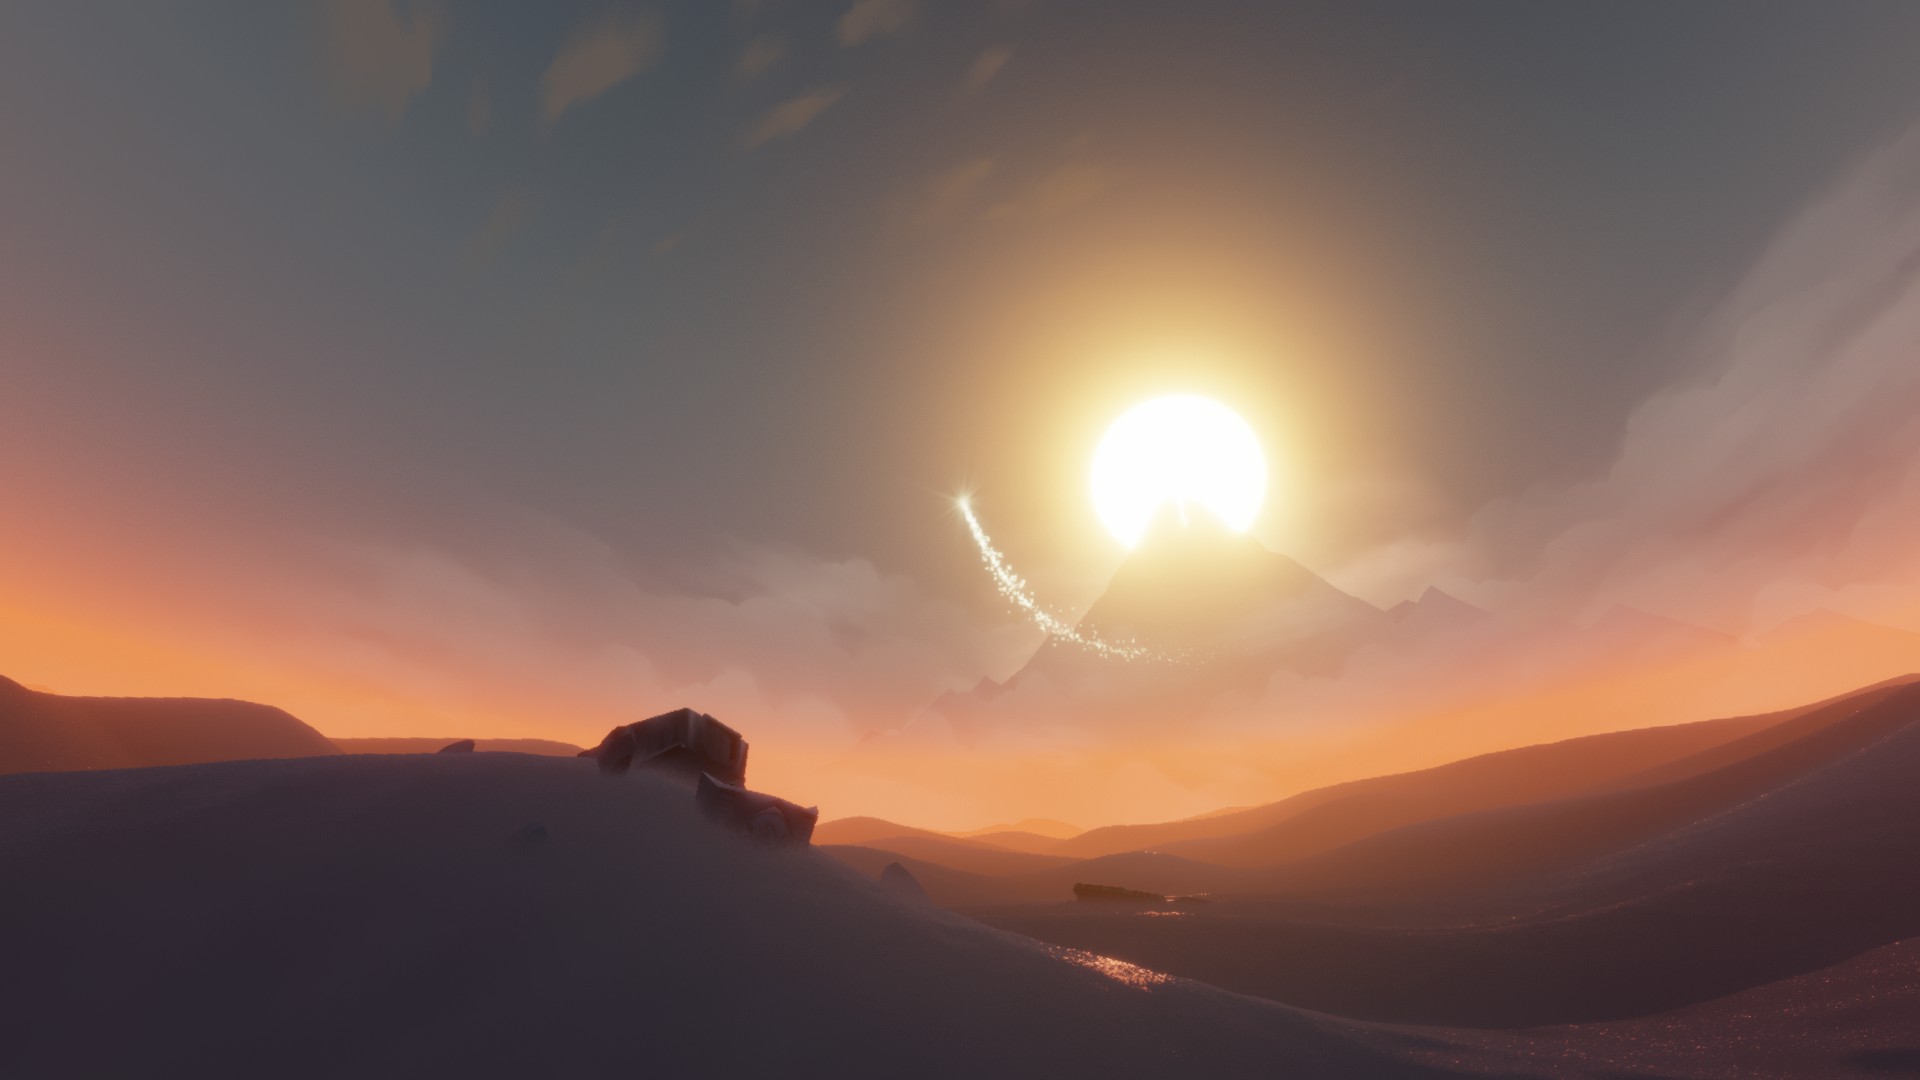 Journey Game Video Games Screen Shot 1920x1080